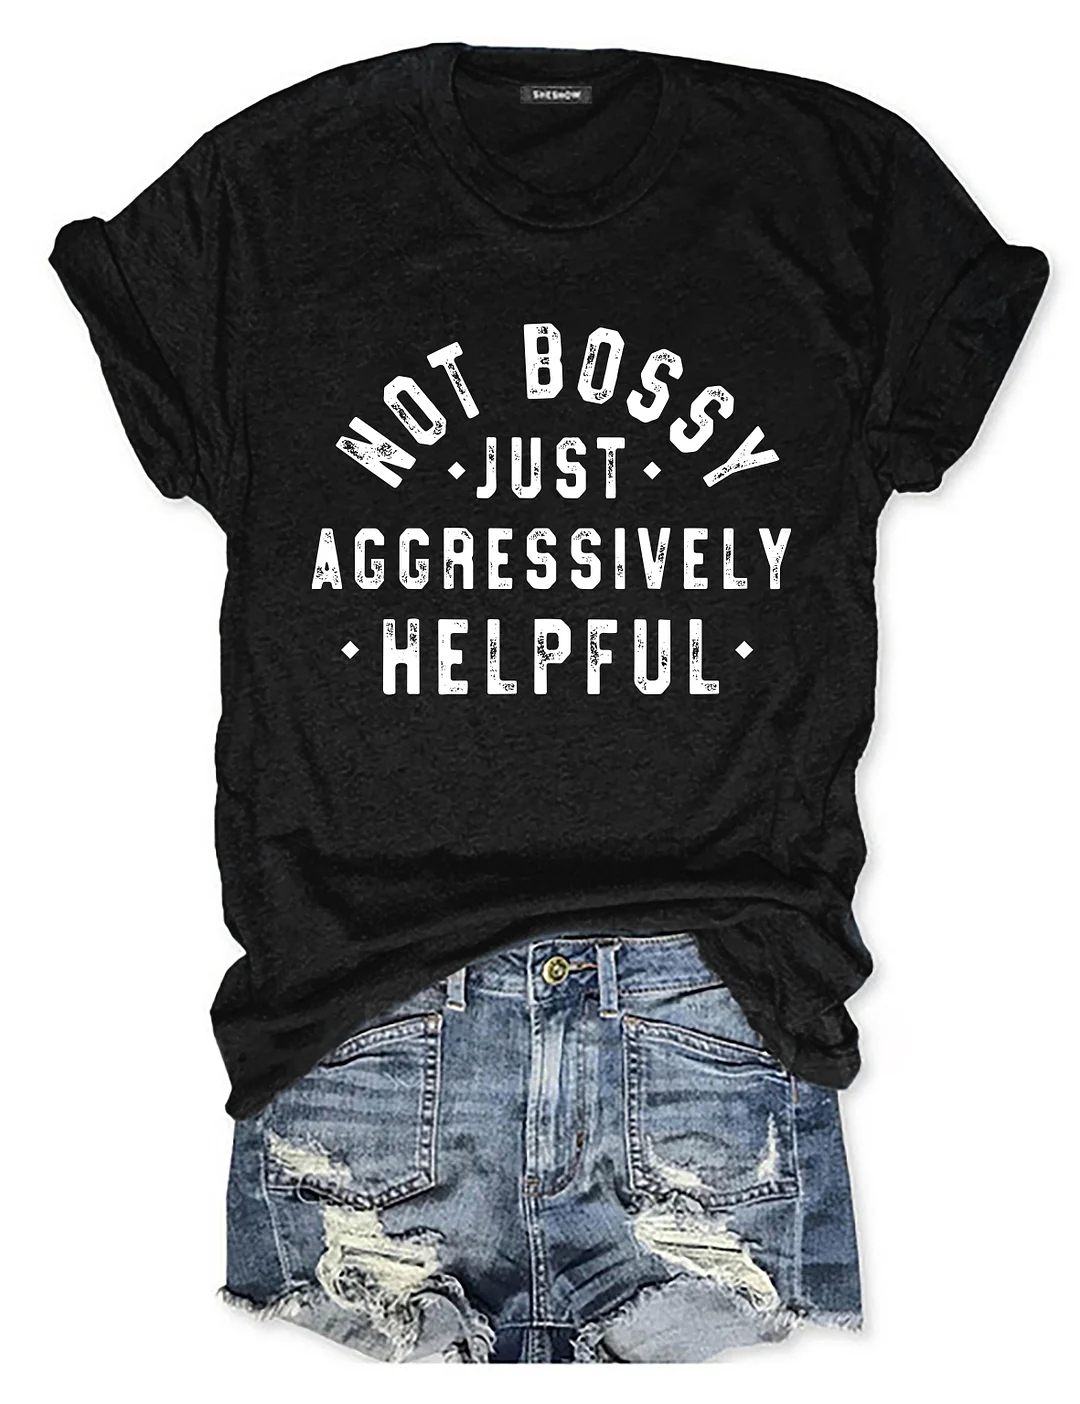 Not Bossy Just Aggressively Helpful T-shirt